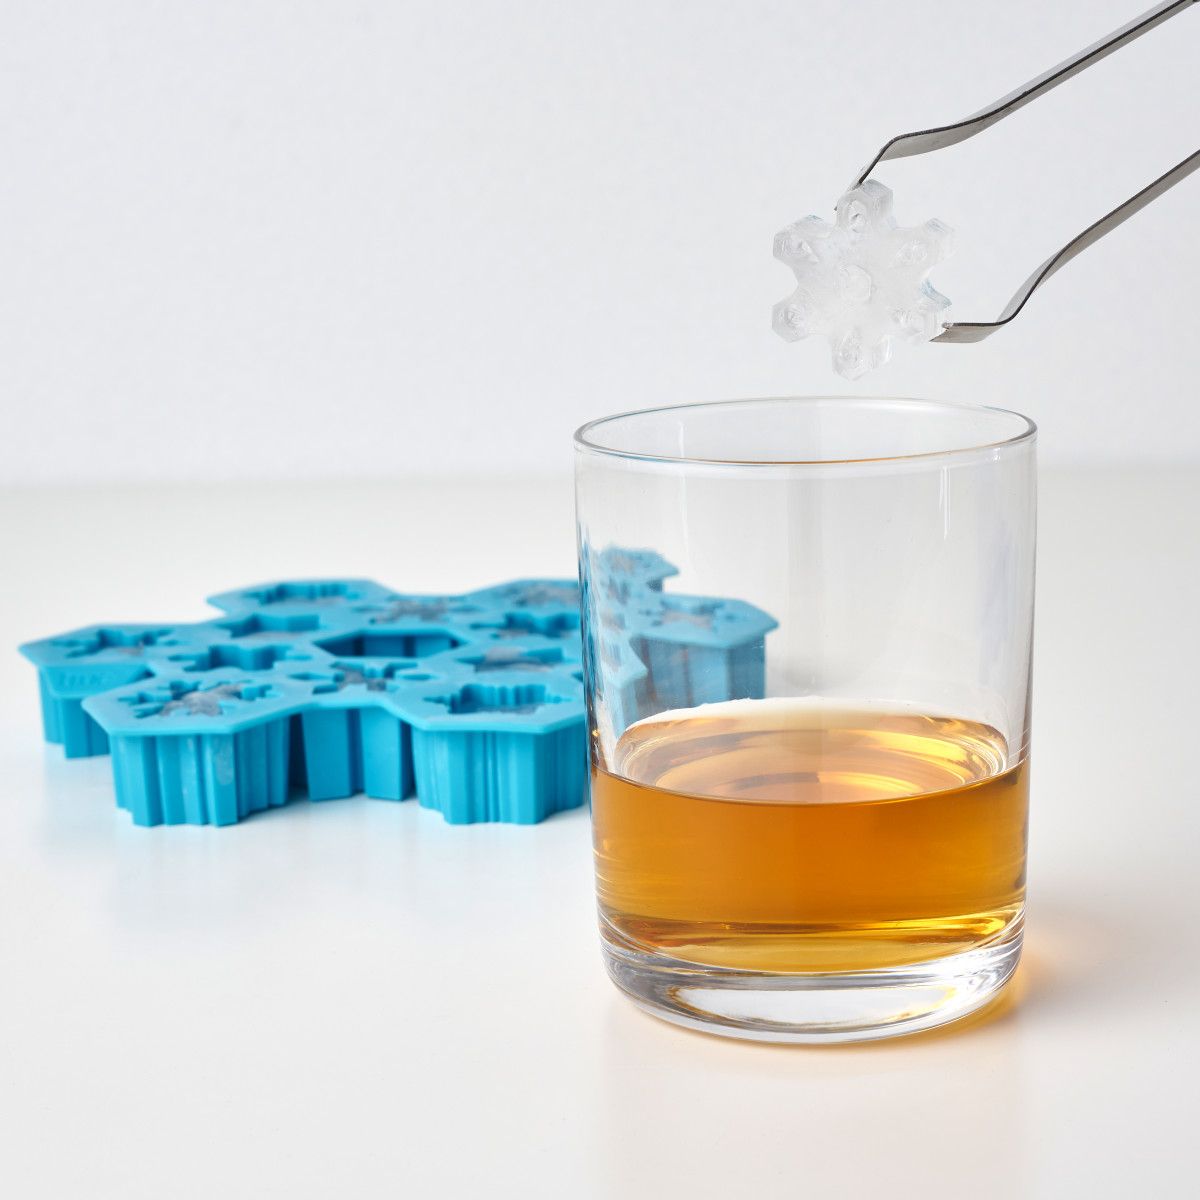 U Ice of A™ Ice Blue Silicone Cube Tray by TrueZoo